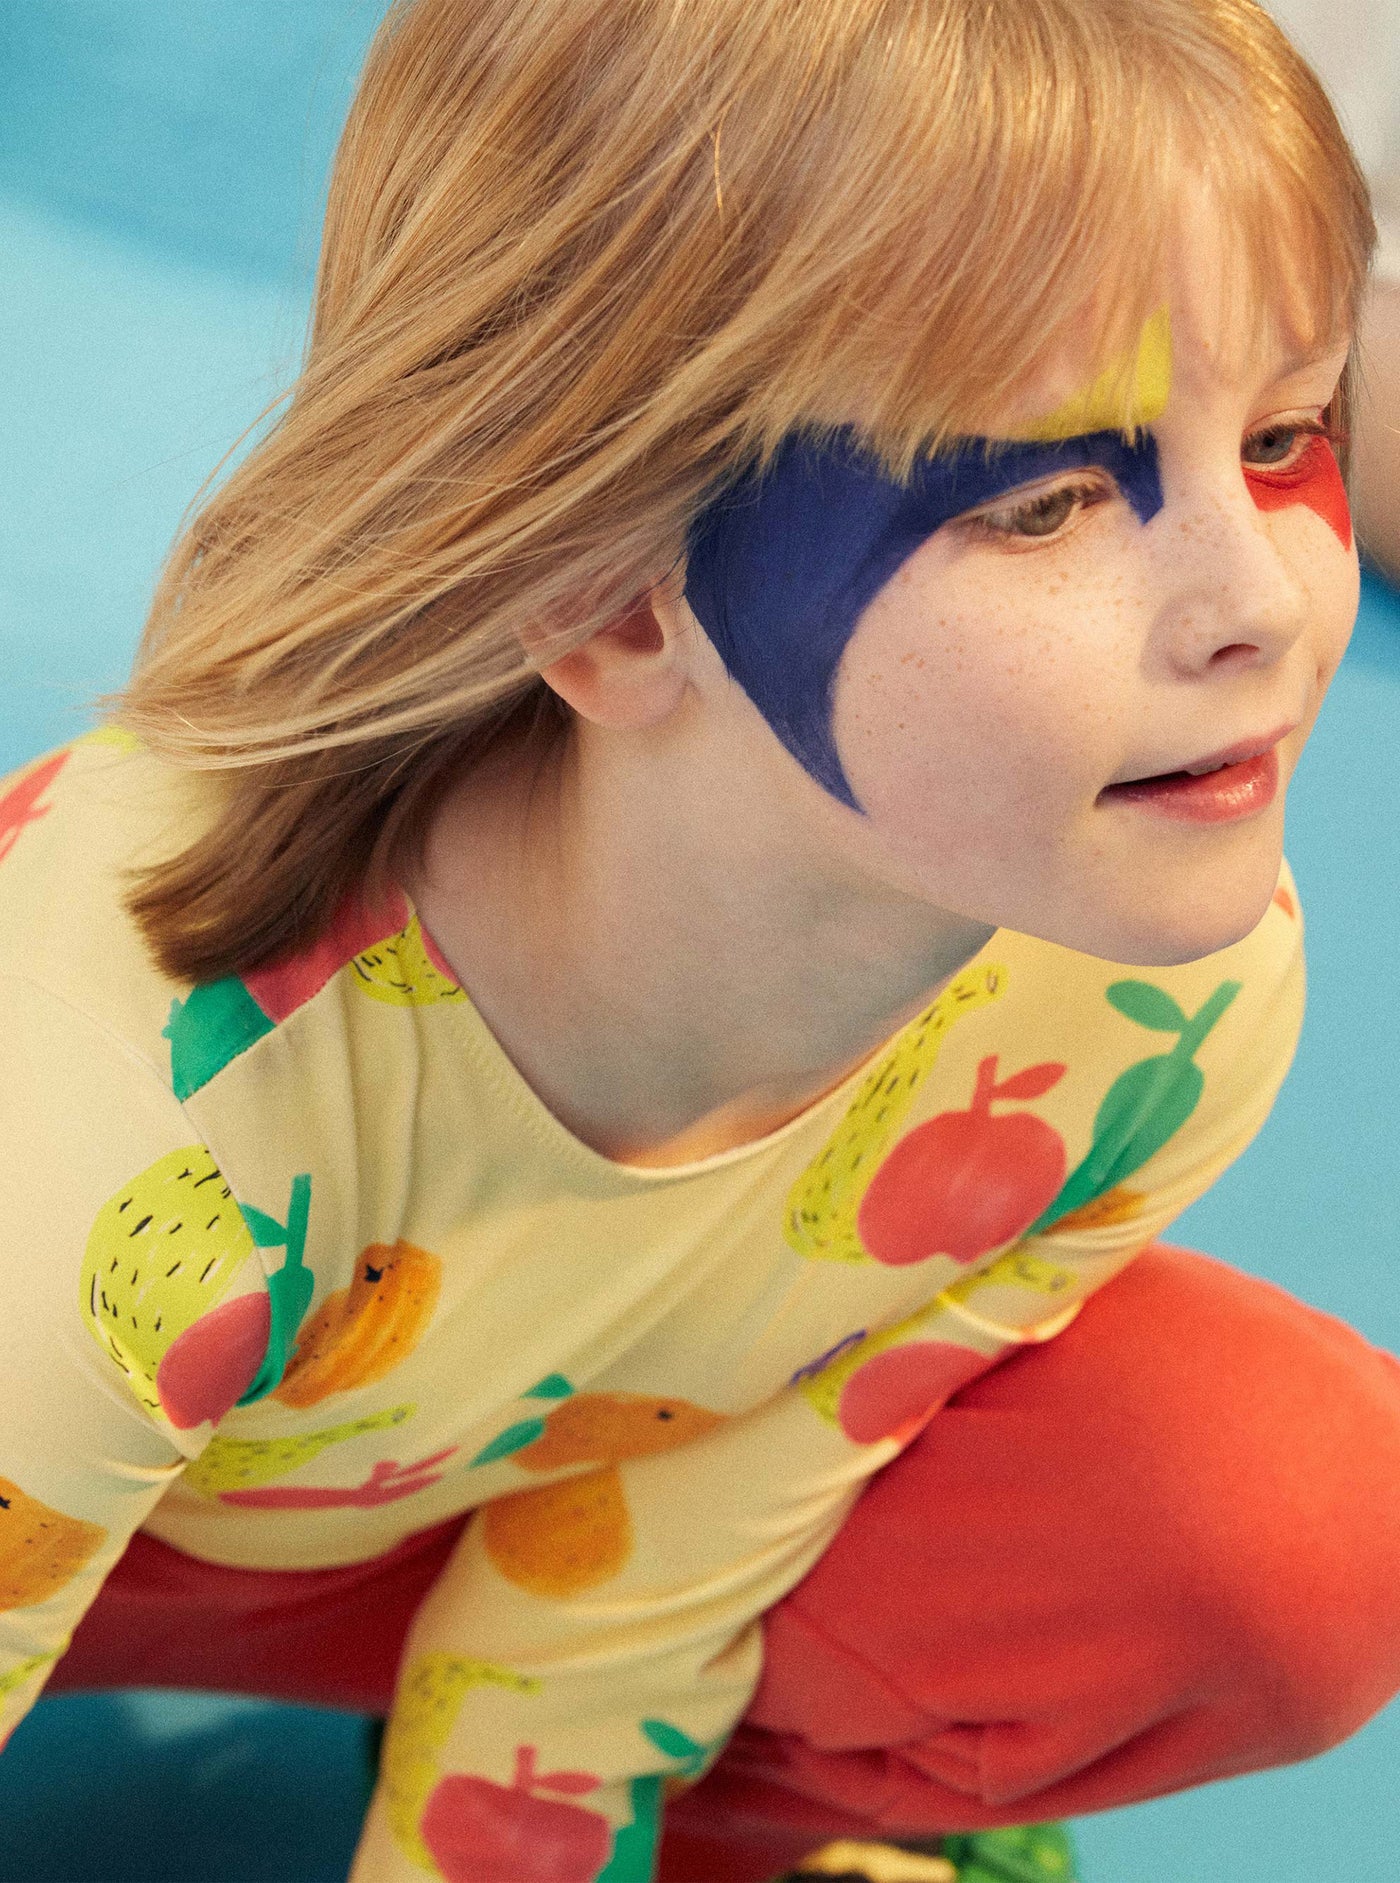 SS23 eclectic fashion for kids, an interview with Laia Aguilar